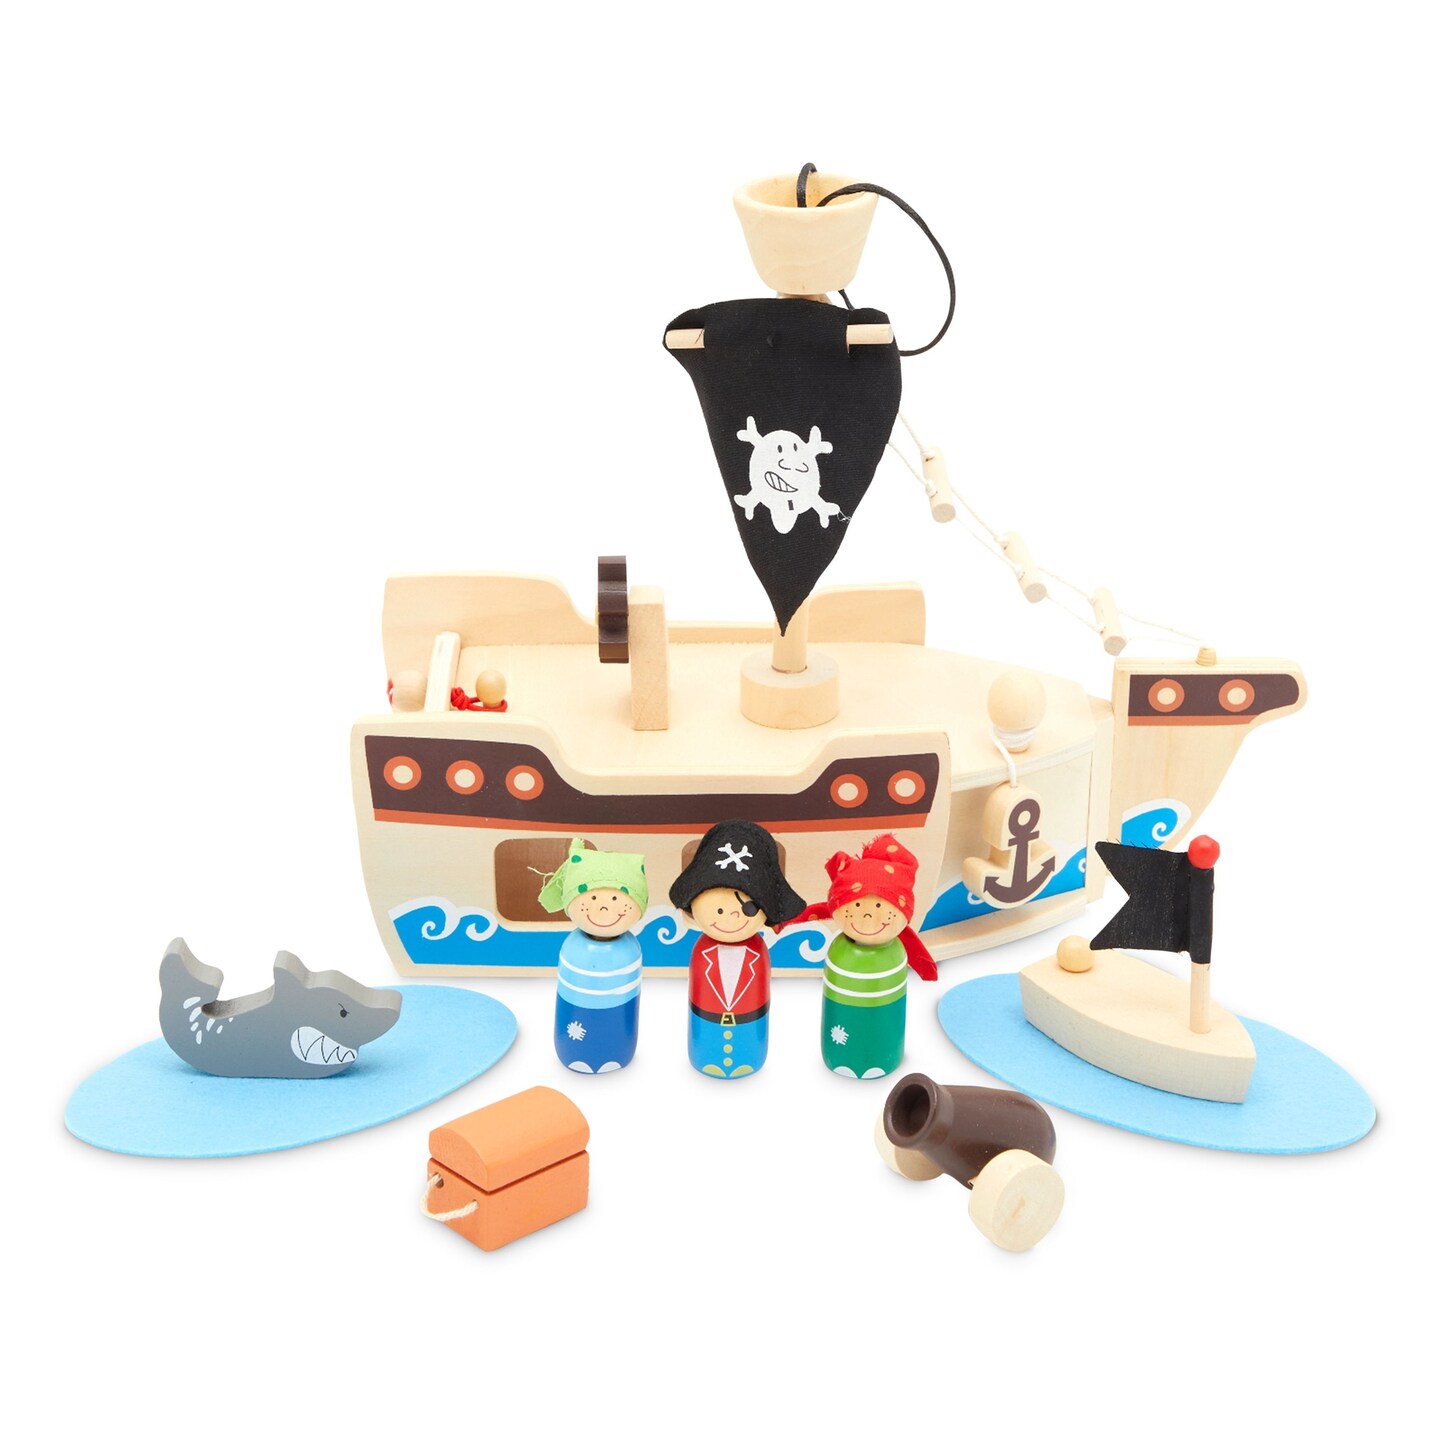 Wooden Pirate Ship for Kids Ages 3-7 - Pirate Toys Playset with Pirate Boat and Shark Figurines (11 Pieces)